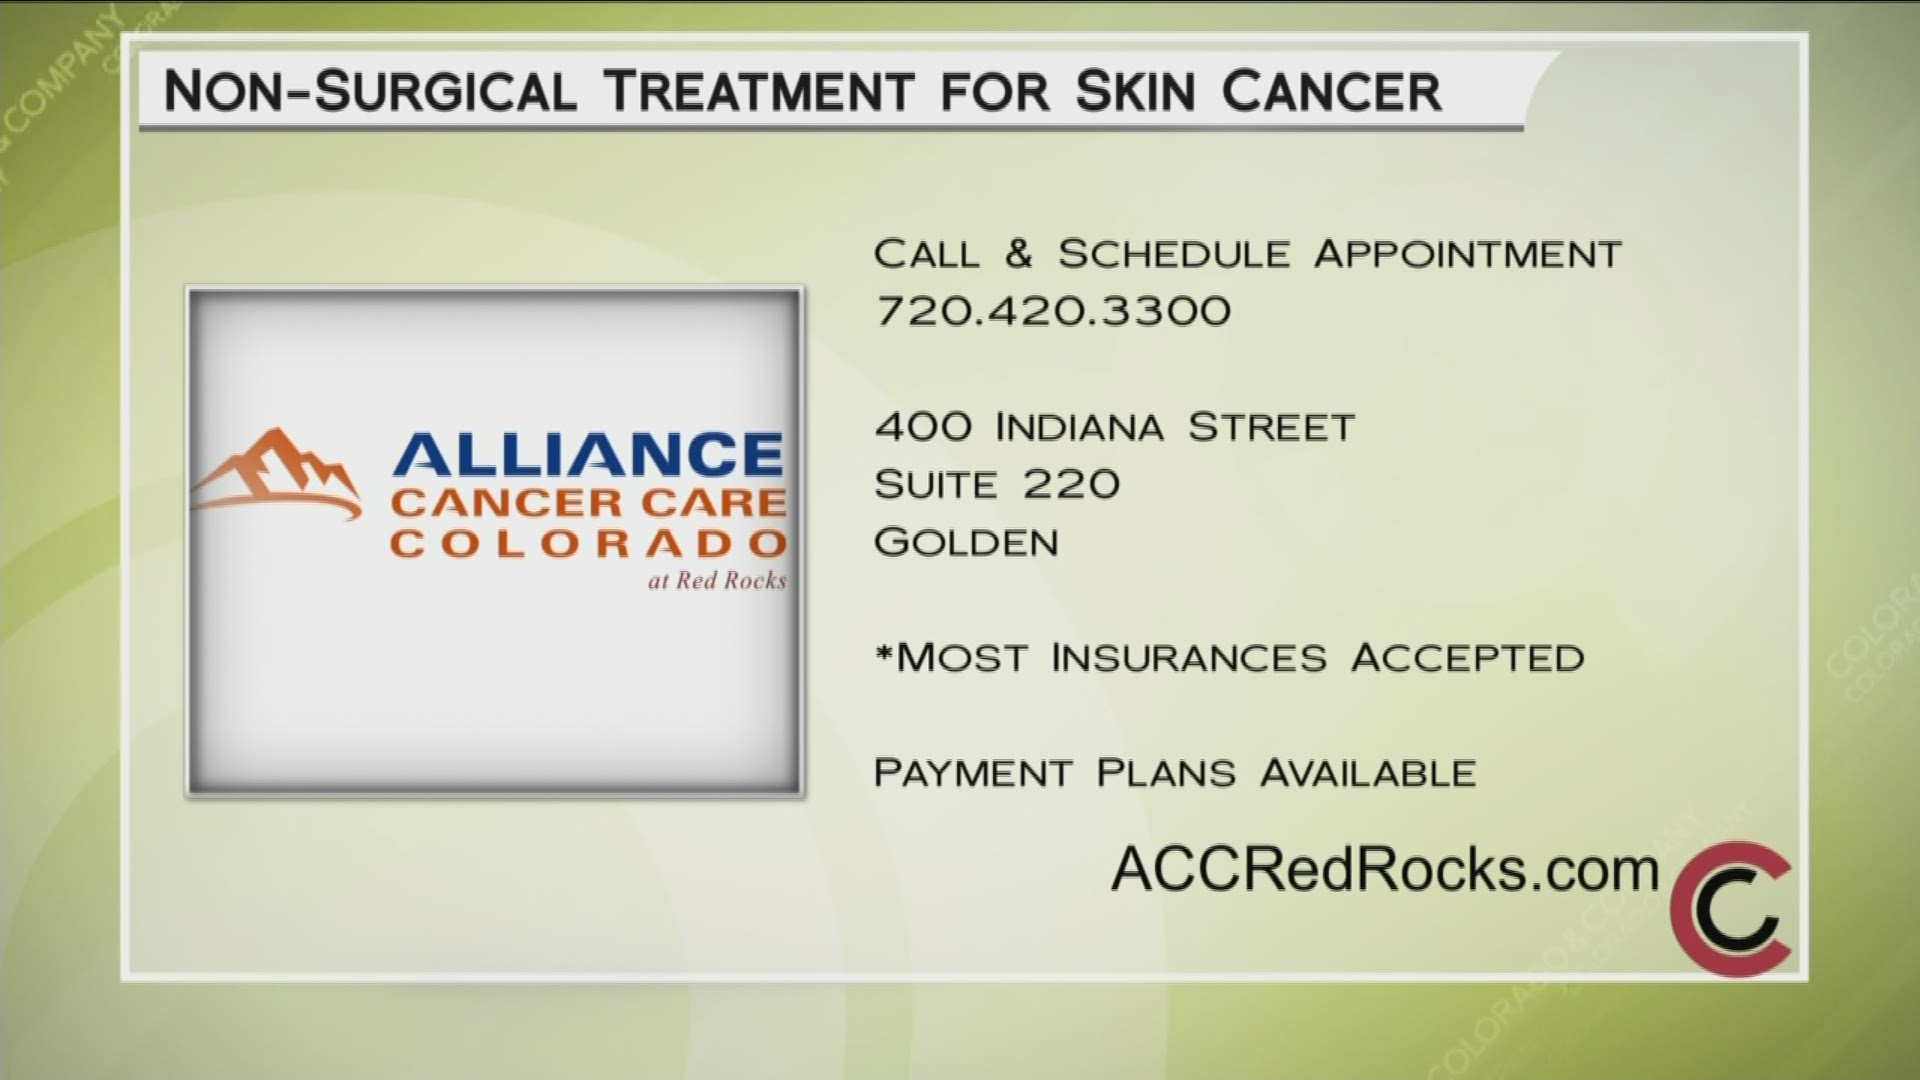 Find out if Dr. Schewe's non-surgical treatment for skin cancer can work for you. Call 720.420.3300 or find out more at ACCRedRocks.com.